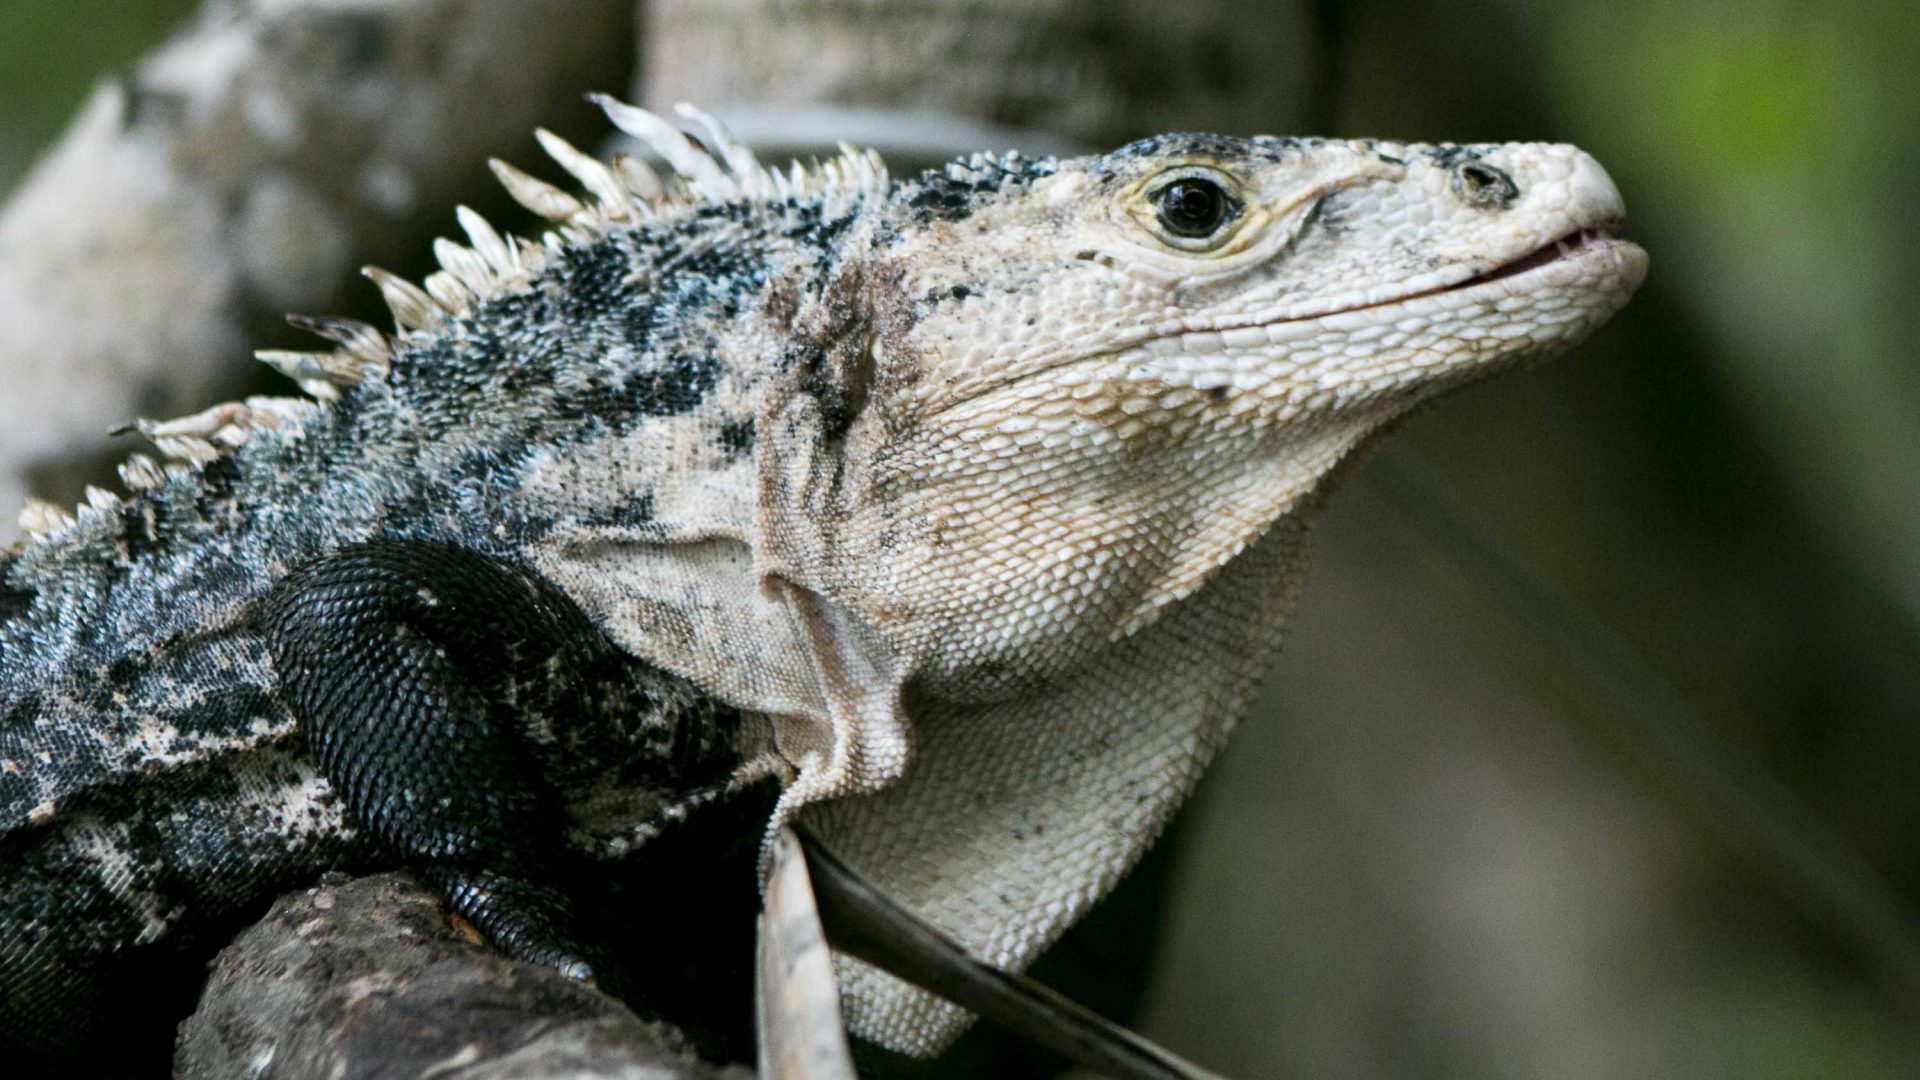 A reptile sits on a branch. It is grey and black and looks up.